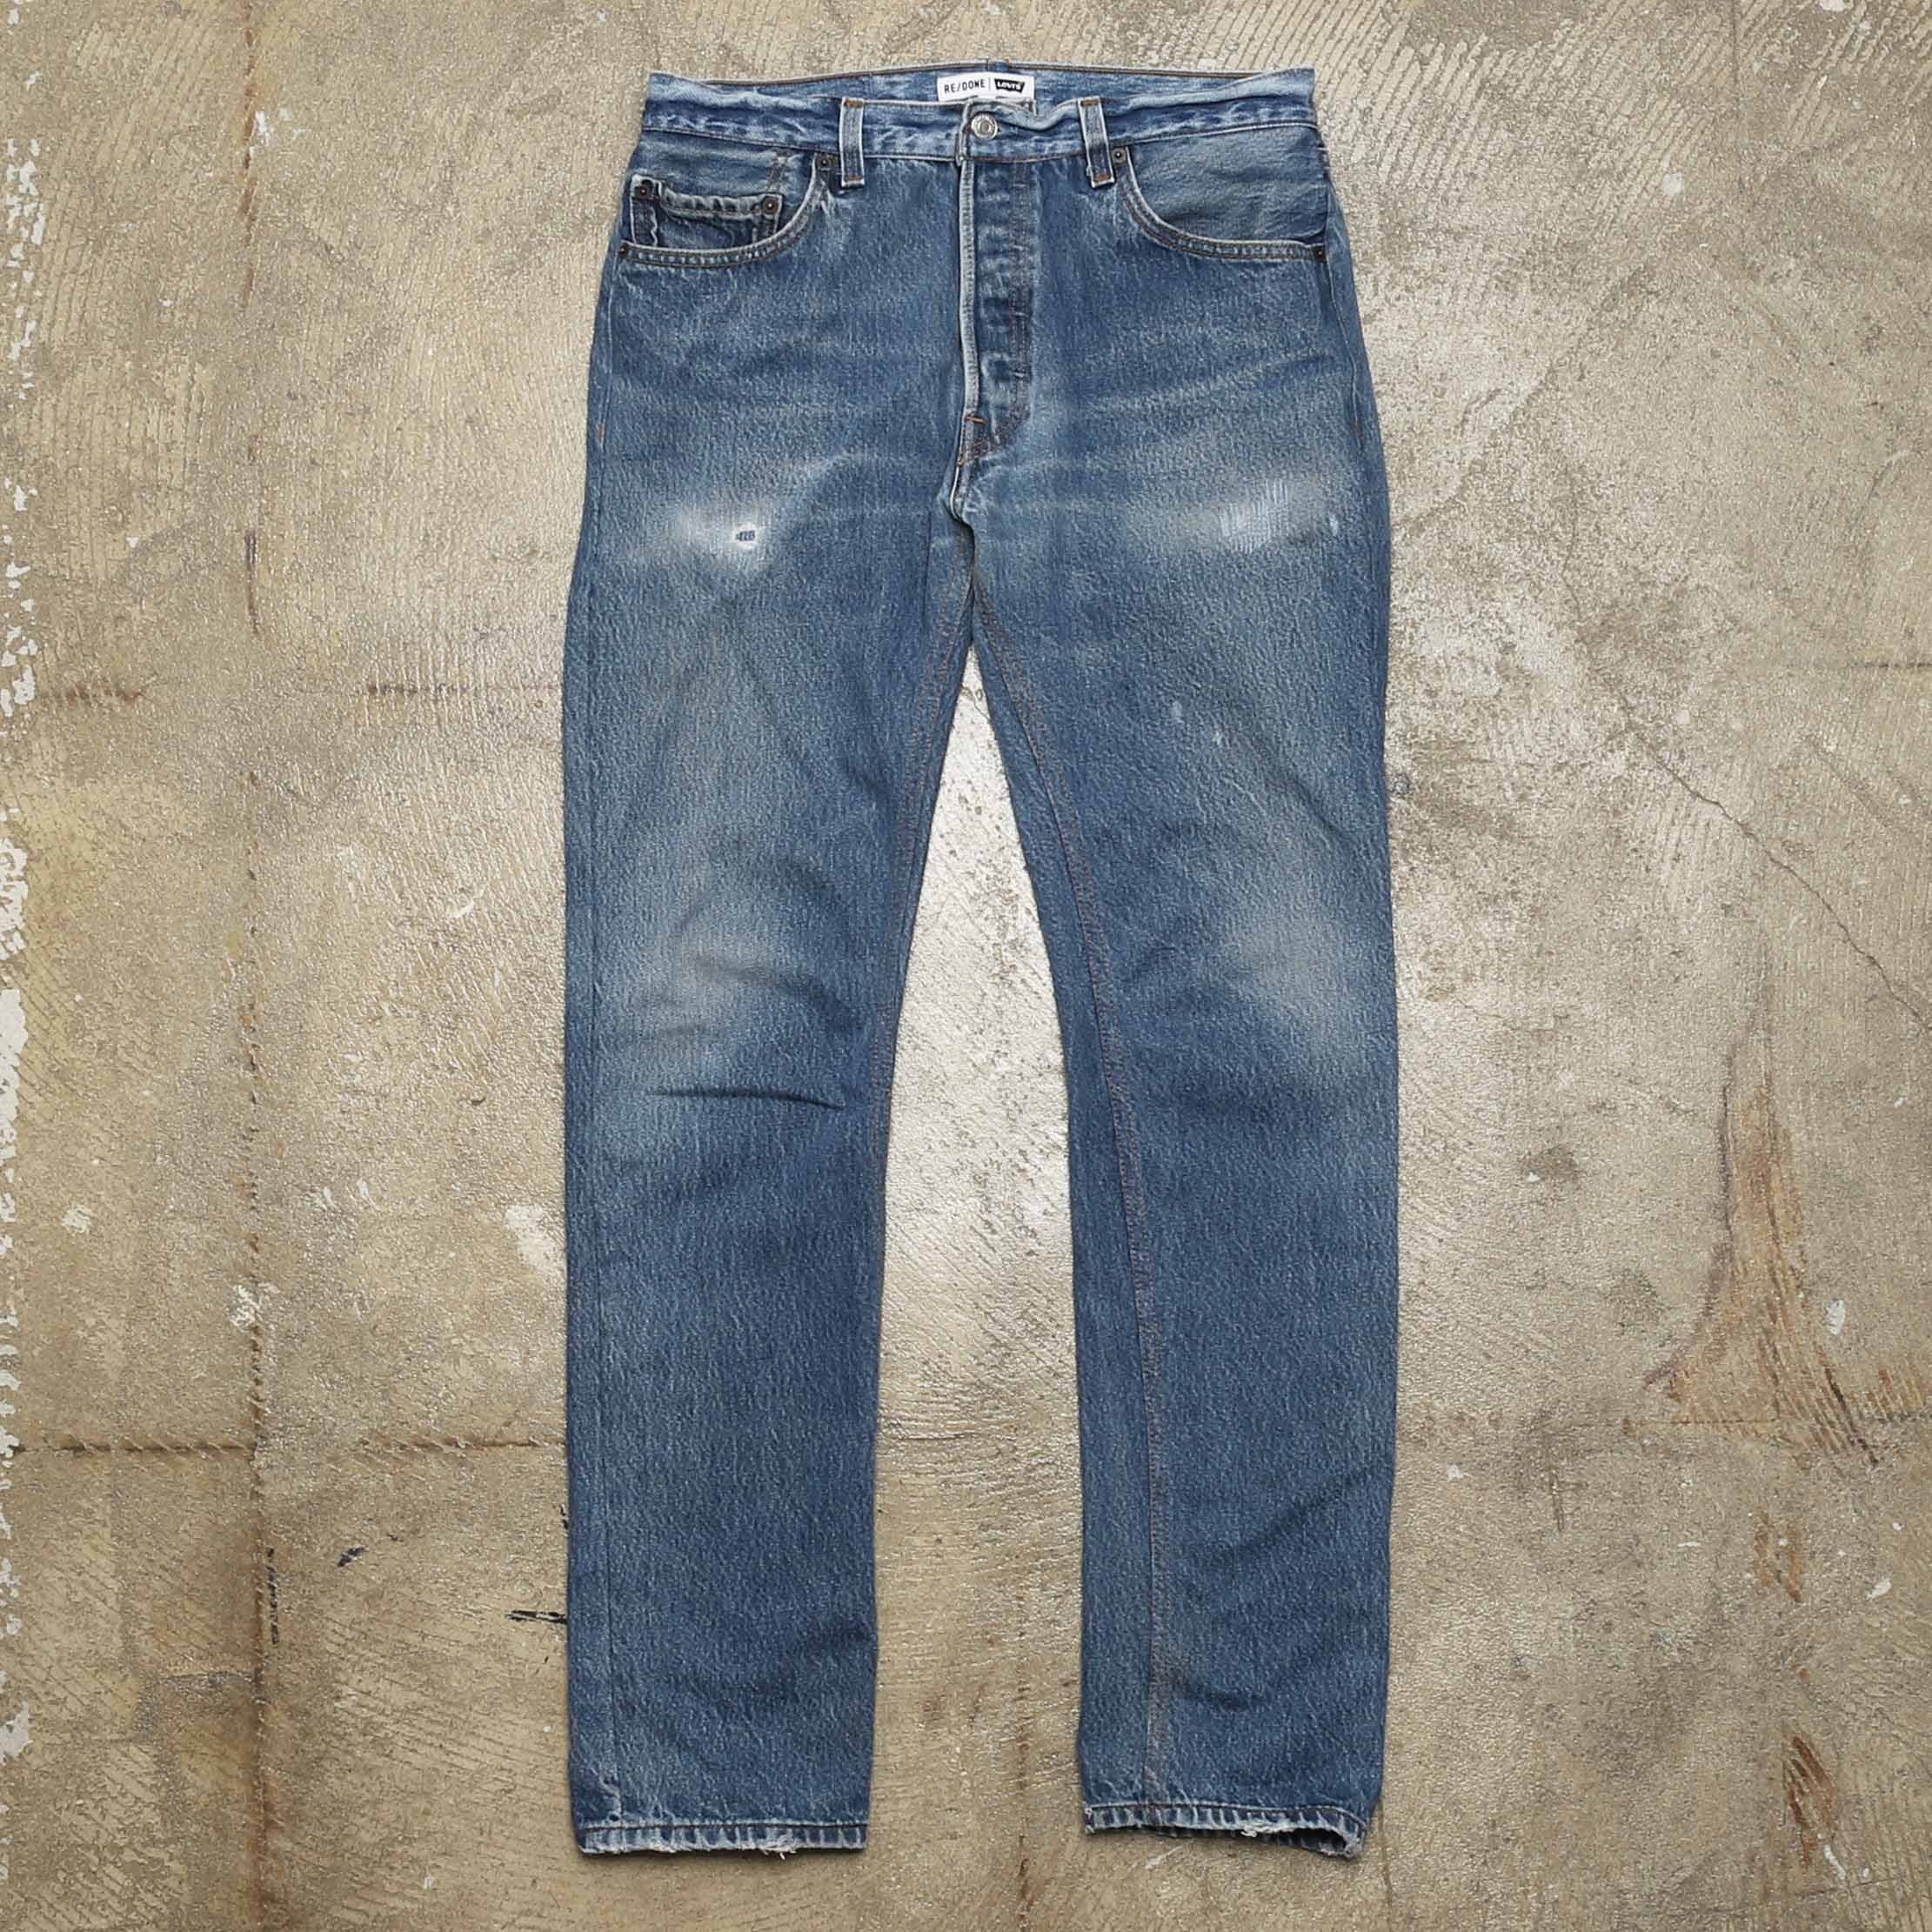 LEVIS REDONE JEANS